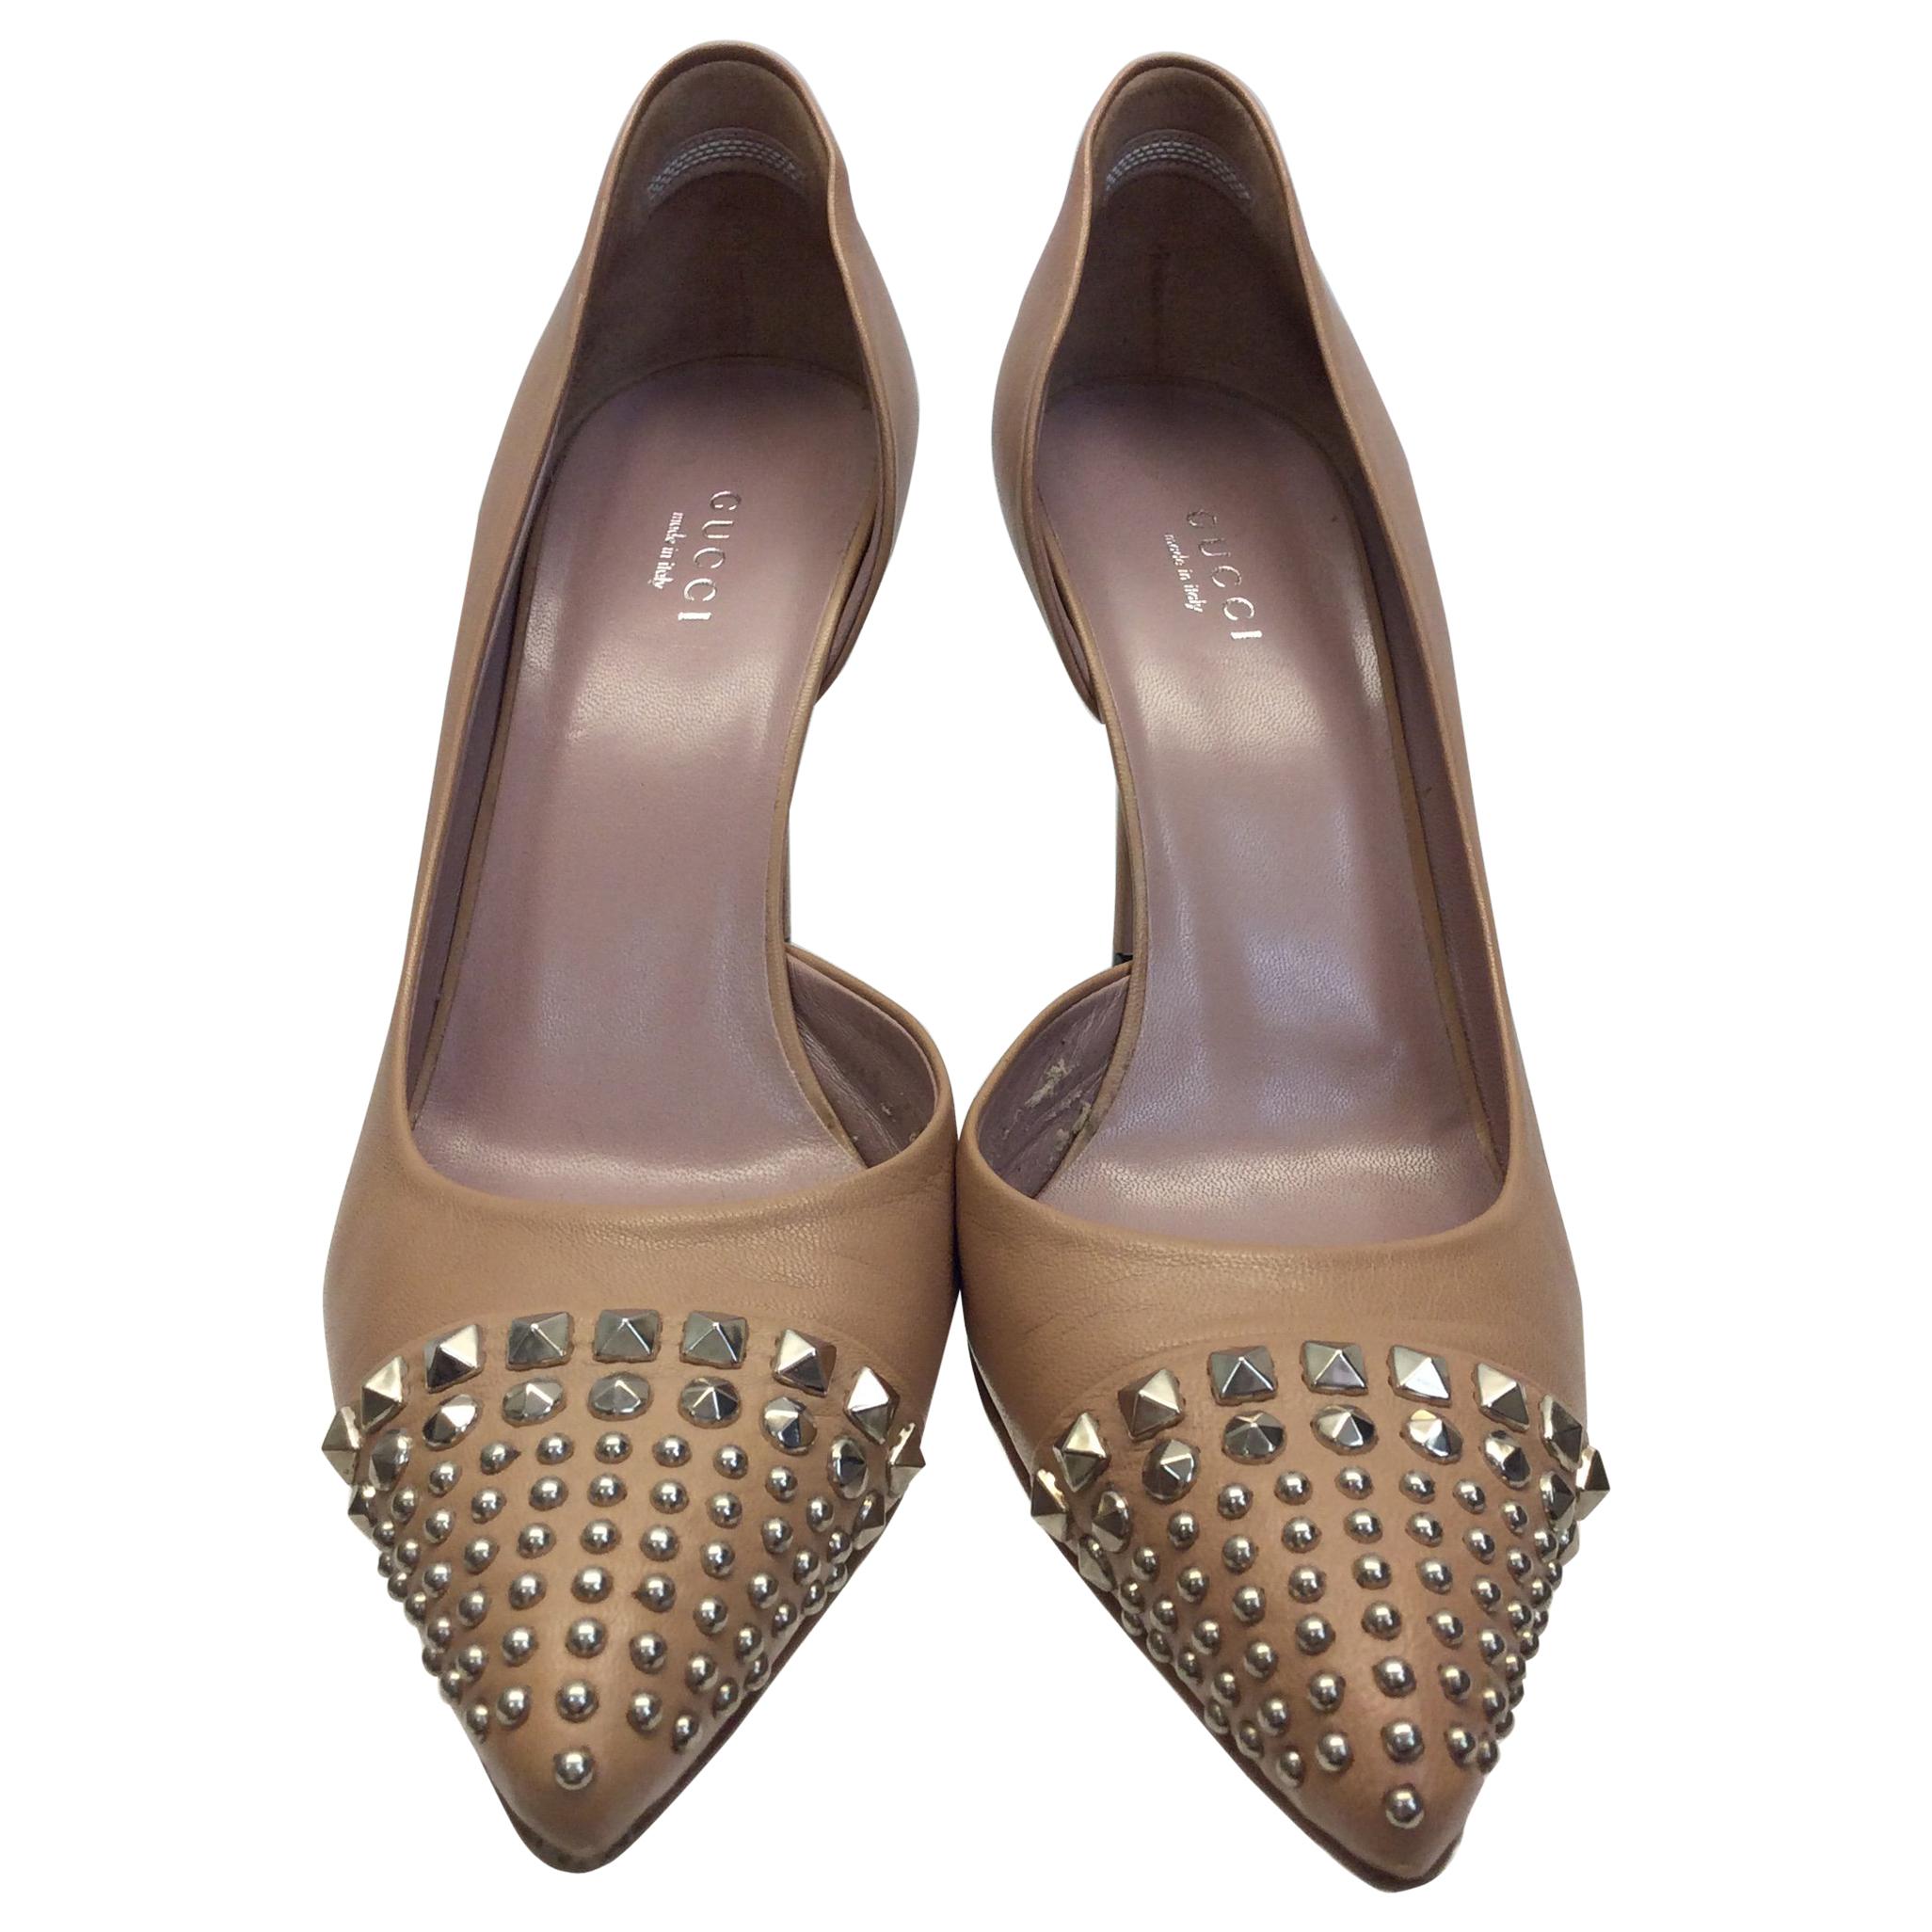 Gucci Tan Leather Studded Heels For Sale